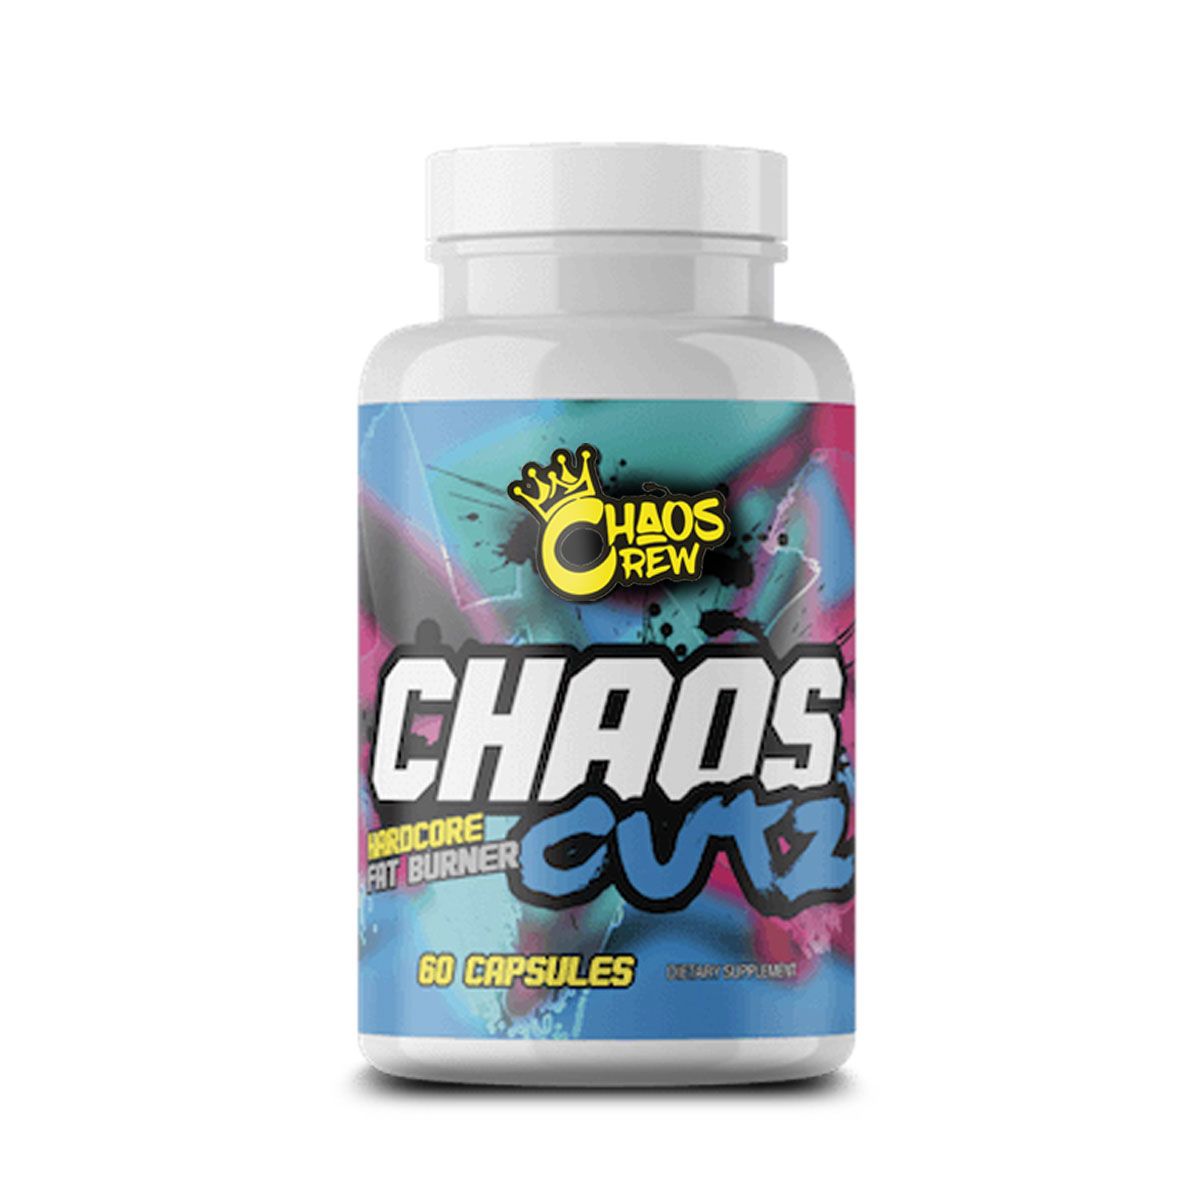 Chaos Crew Chaos Cuts 60 Capsules